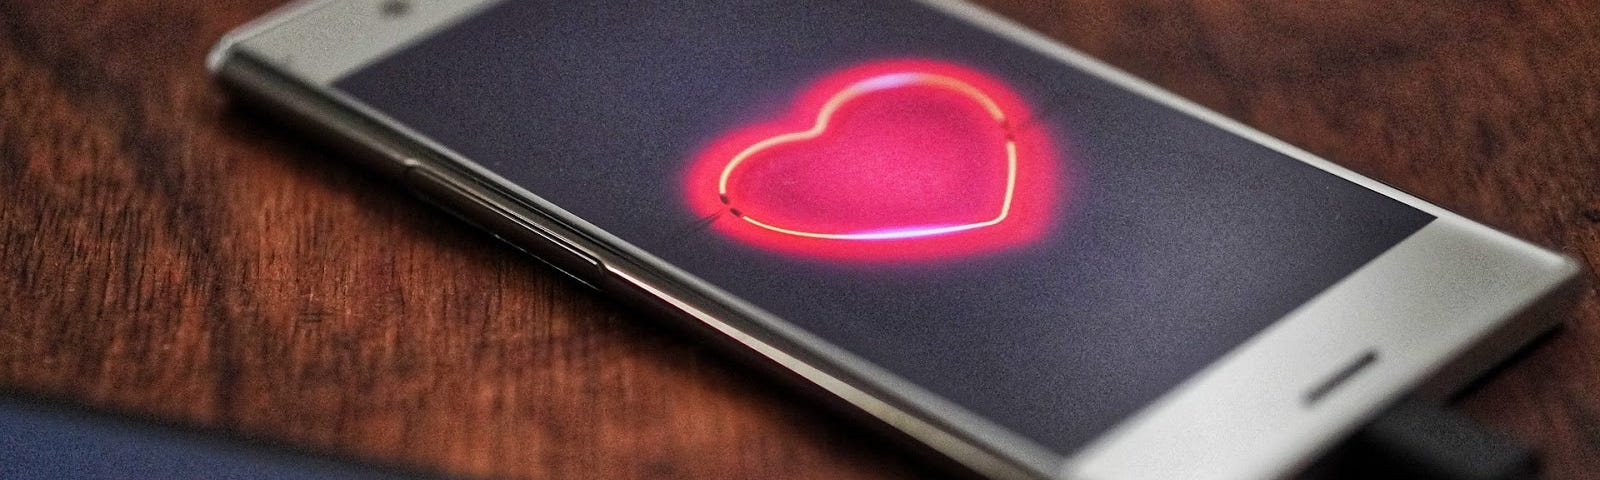 Two smartphones displaying bright red hearts.